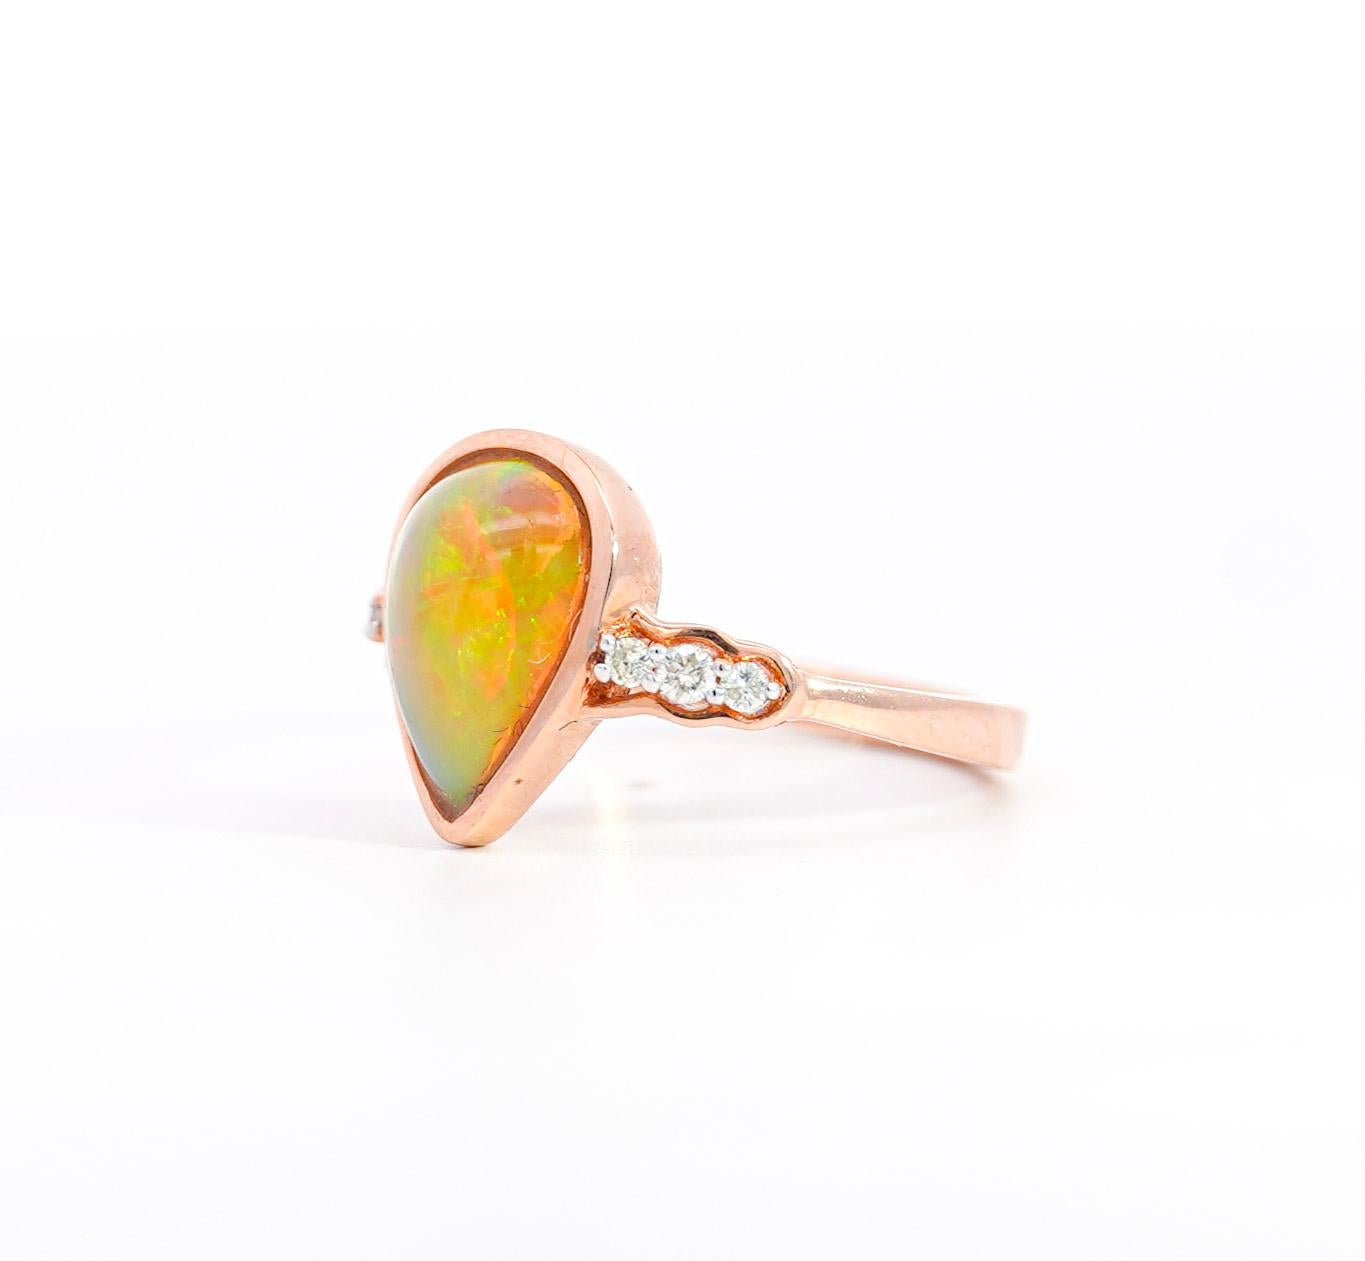 Vintage cabochon cut pear-shaped opal and diamond ring. Set in a 14K rose gold setting, weighing 3.3 grams, ring size 6.75 (adjustable). The Opal featured a magnificent array of iridescent colors that can only be found fo the finest natural